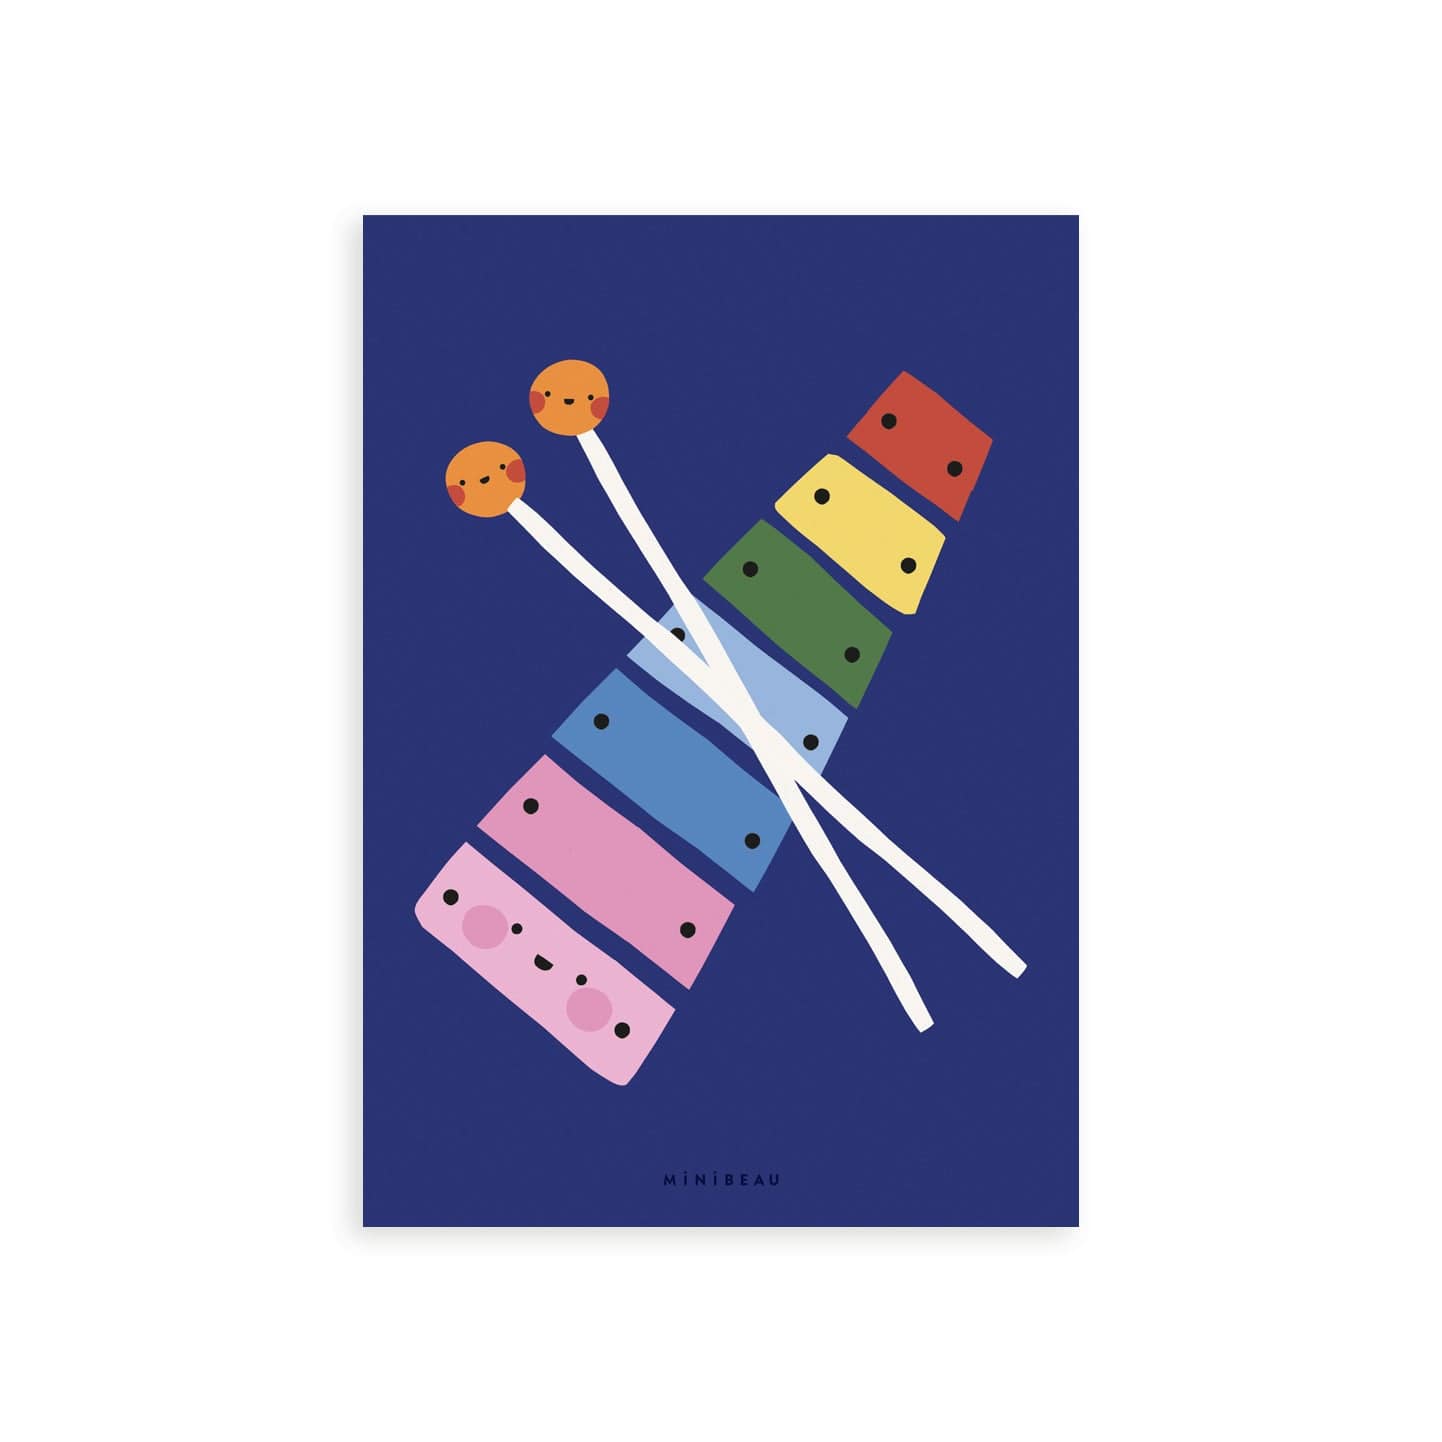 Our Happy Alphabet 'X' Art Print shows a smiling xylophone with bars in rainbow colours, crossed by smiling beaters, creating an X shape on a dark blue background.